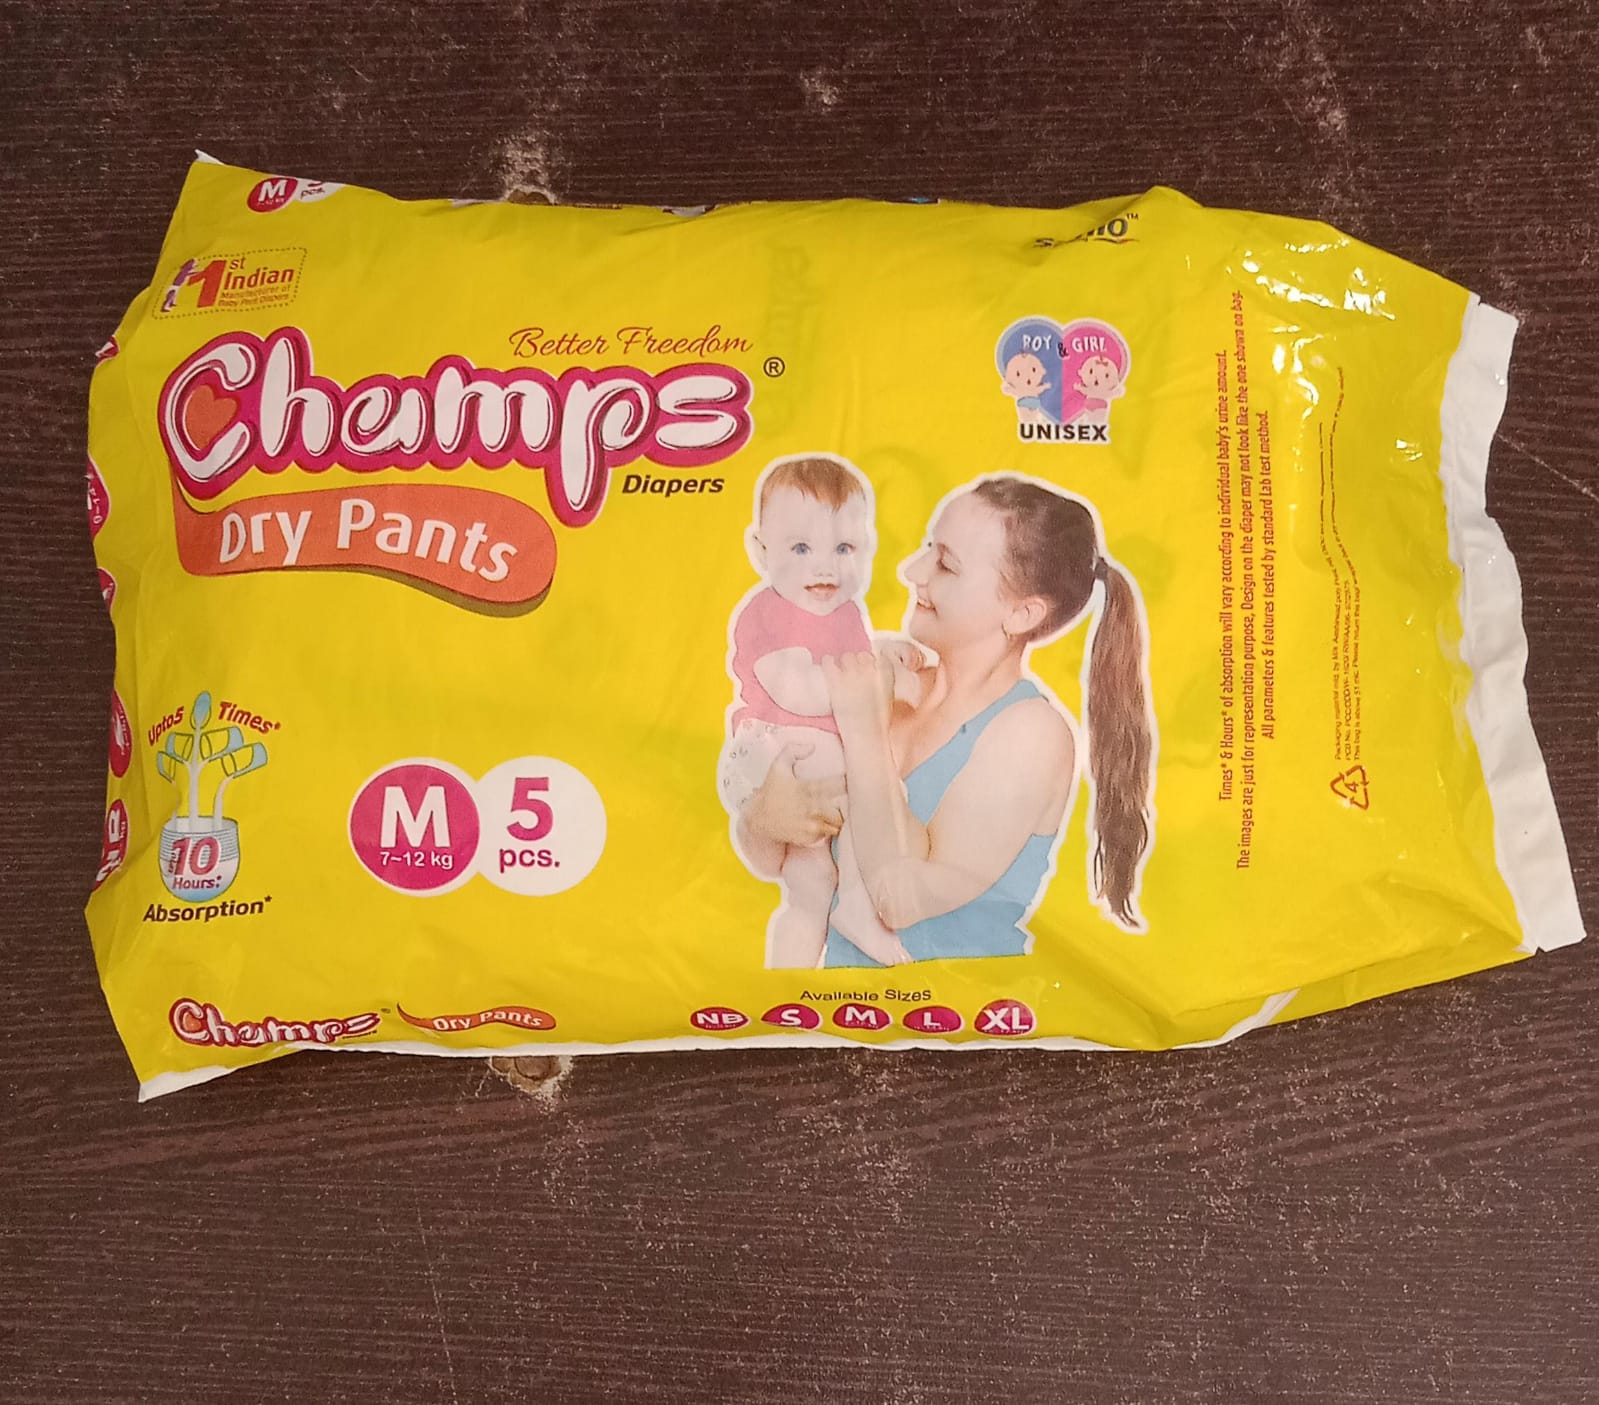 0973 Medium Champs Dry Pants Style Diaper- Medium (5 pcs) Best for Travel  Absorption, Champs Baby Diapers, Champs Soft and Dry Baby Diaper Pants (M, 5 Pcs )